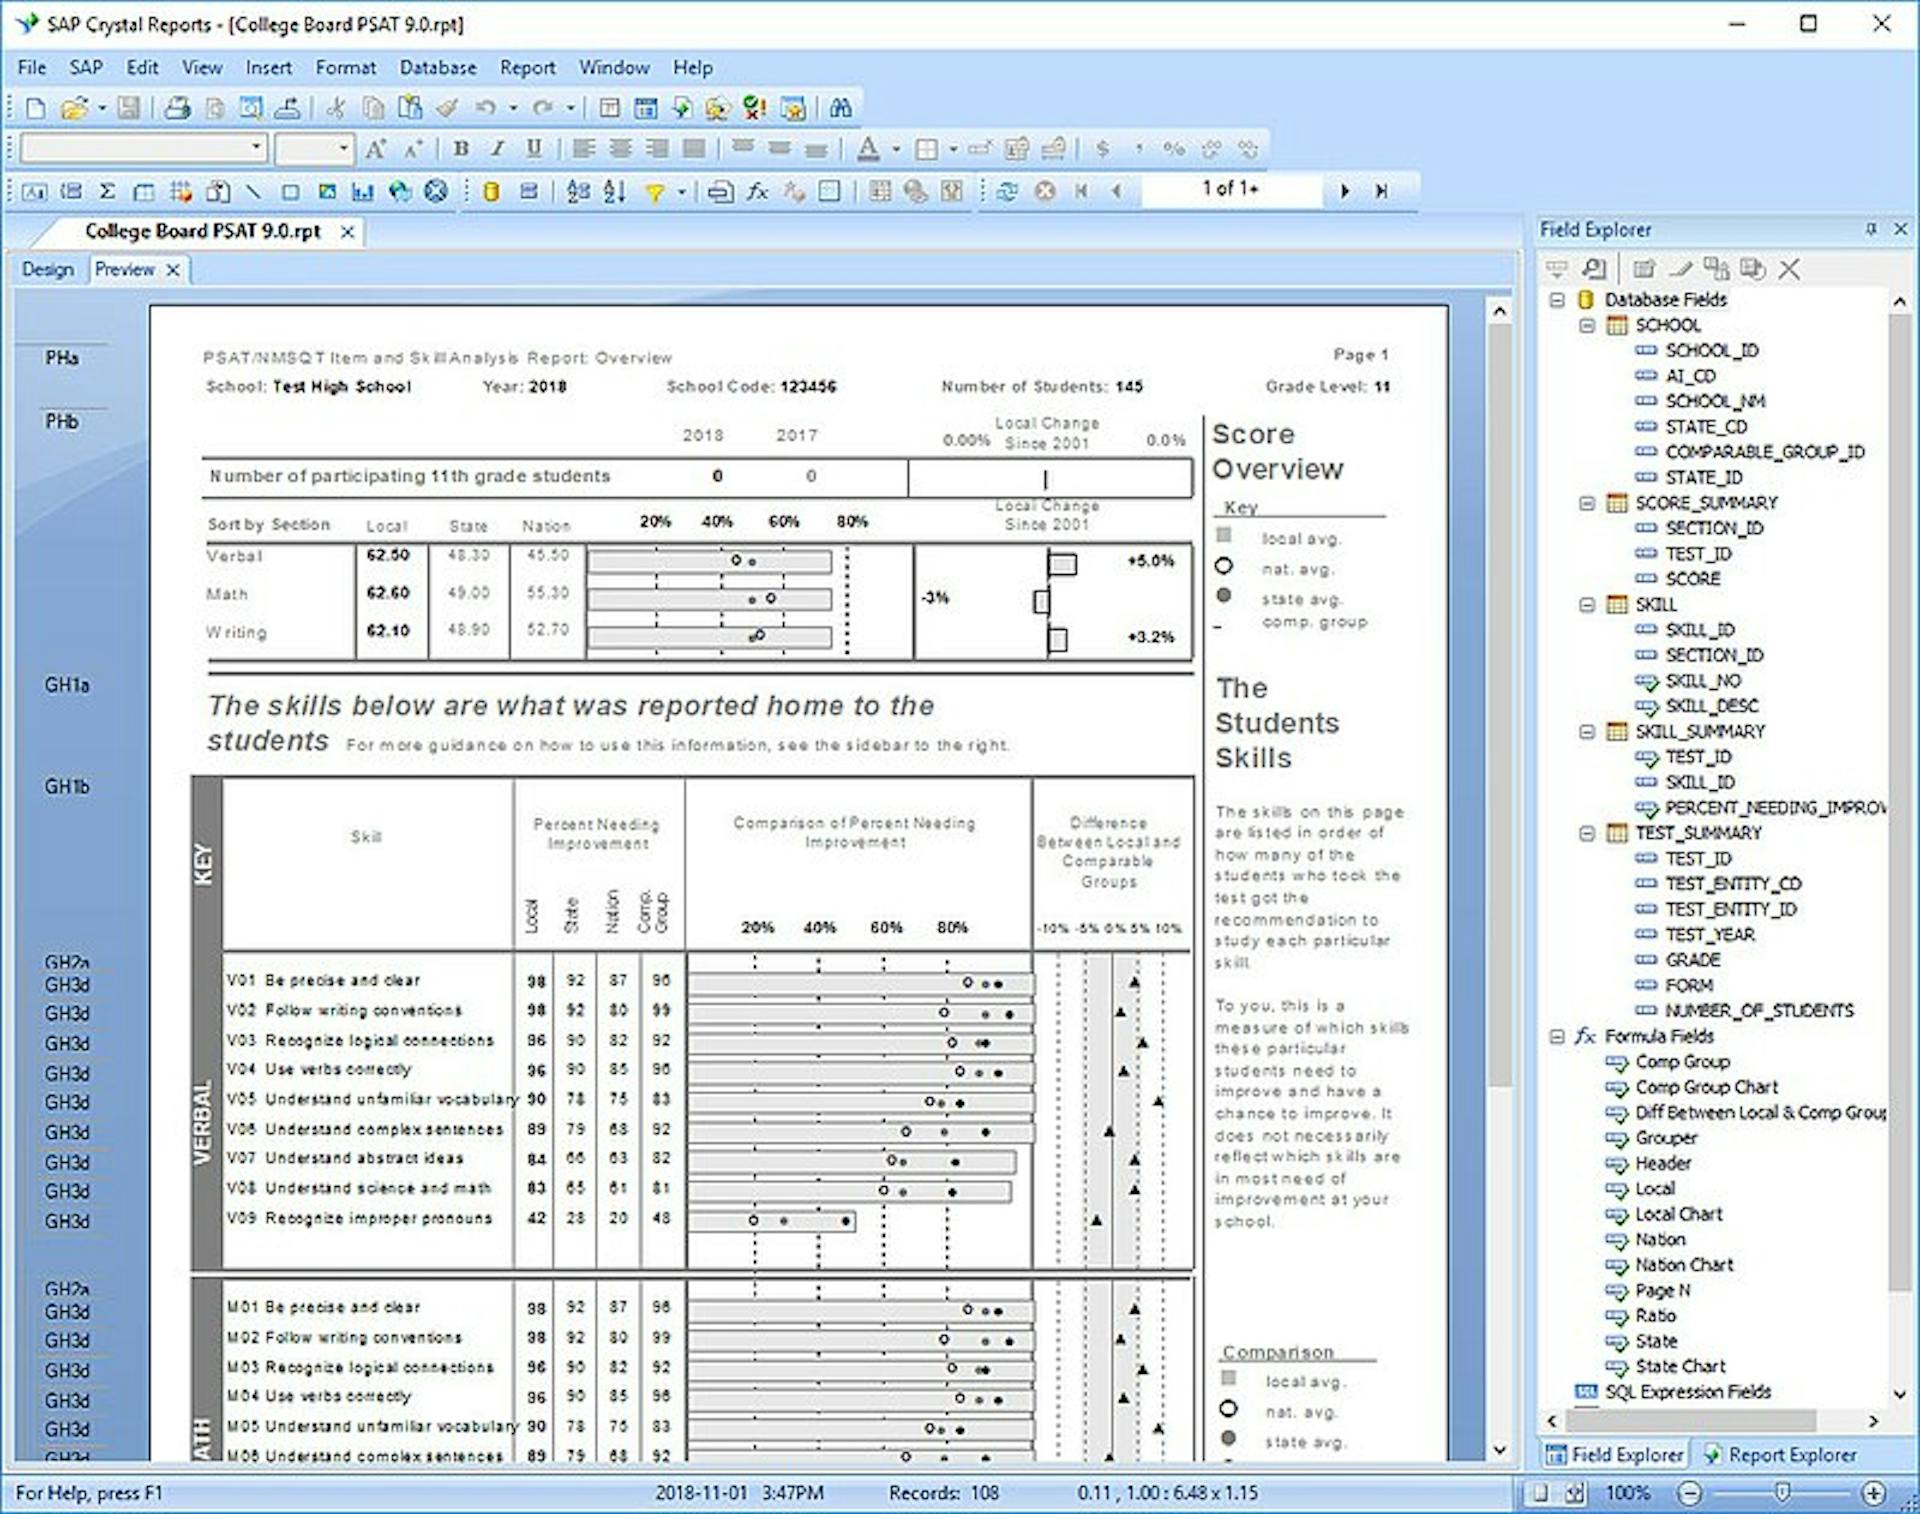 An example of an objectively complex interface design by SAP Crystal Reports